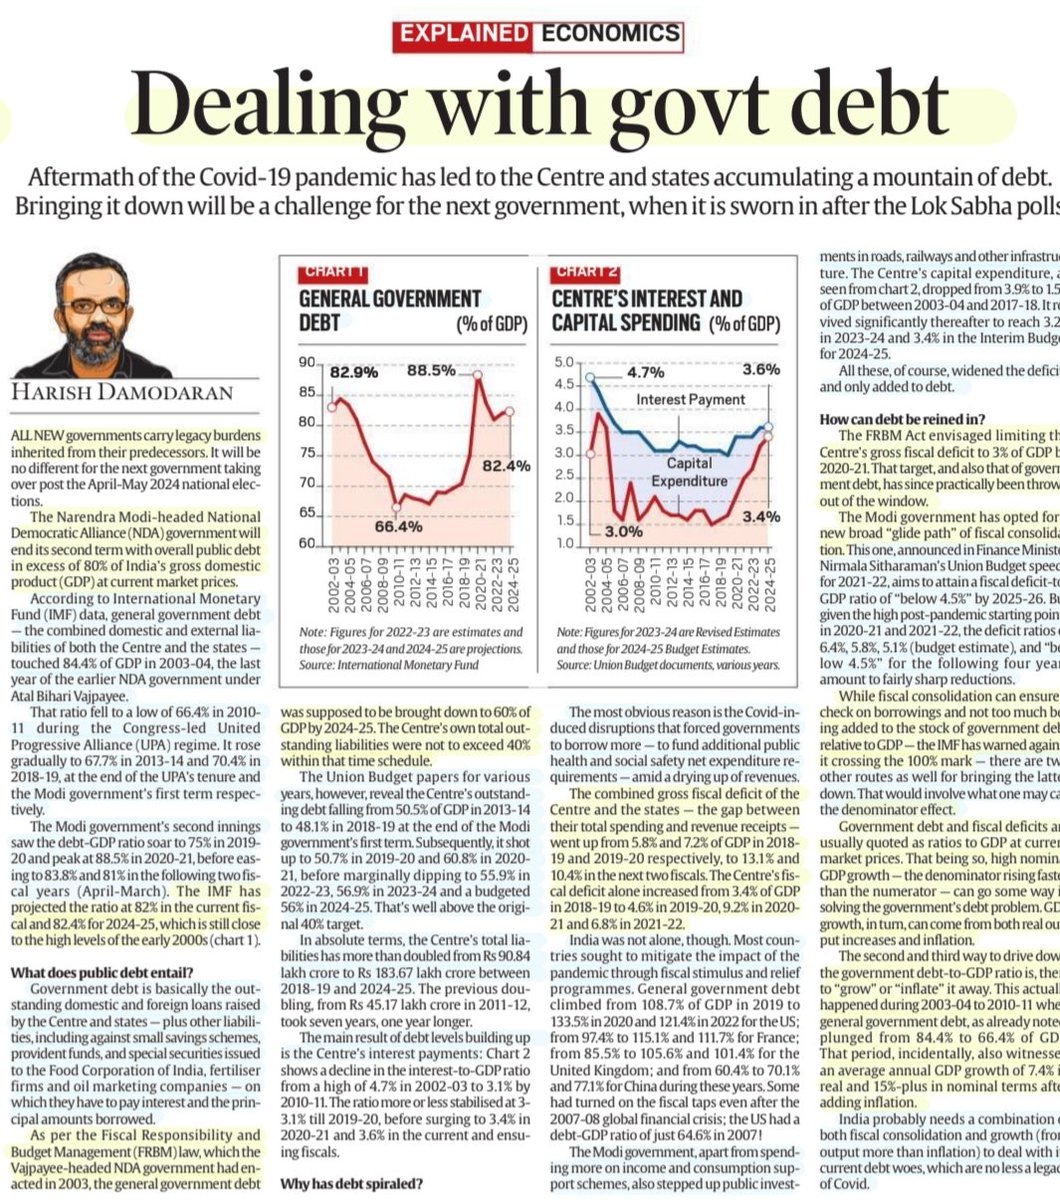 'Dealing with Govt Debt'

:Well explained by Sh Harish Damodaran

#PublicDebt #GovtDebt
#FiscalConsolidation #Fiscal 
#FiscalDeficit #NationalDebt 
#Interest #Capex #inflation #COVID #pandemic
#Borrowings #Tax #Revenue #Spending #GovtBonds #RBI #Markets
#economy 

#UPSC
Source:IE